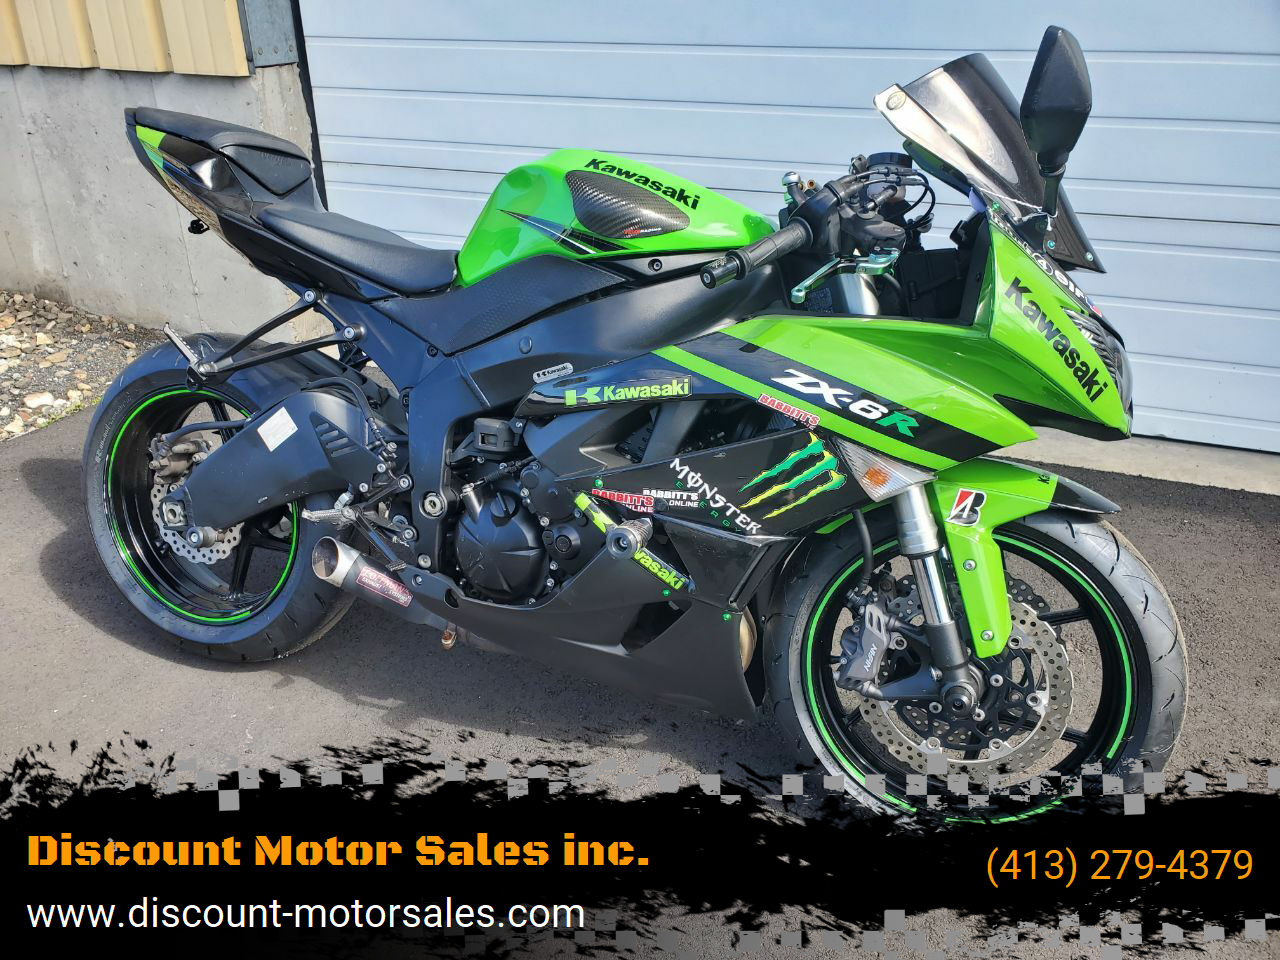 Motorcycles & Scooters For Sale In Massachusetts - Carsforsale.com®